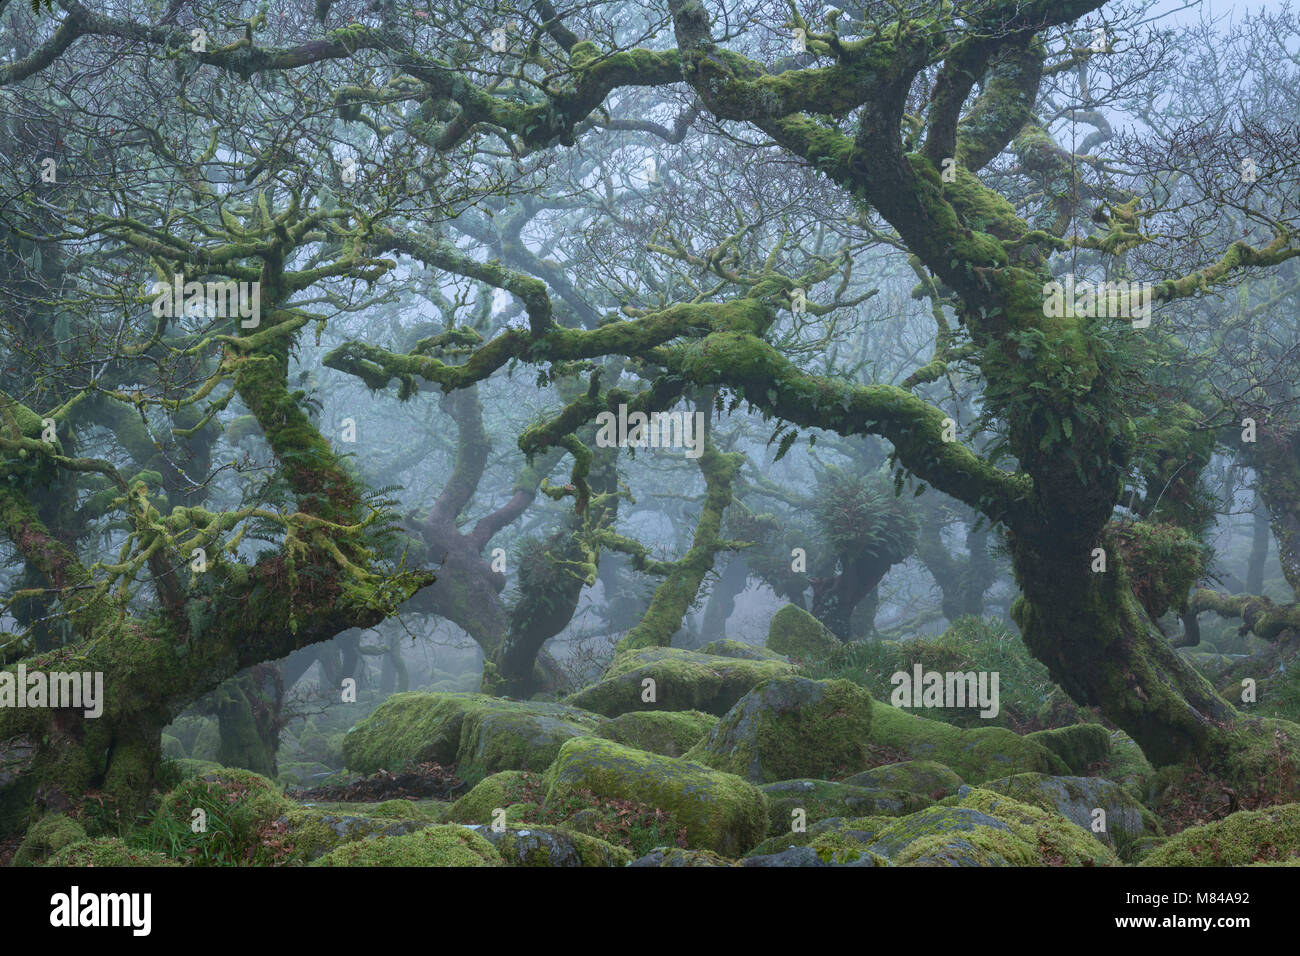 Gnarled and twisted trees in Wistman’s Wood on Dartmoor, Devon, England. Winter (January) 2018. Stock Photo